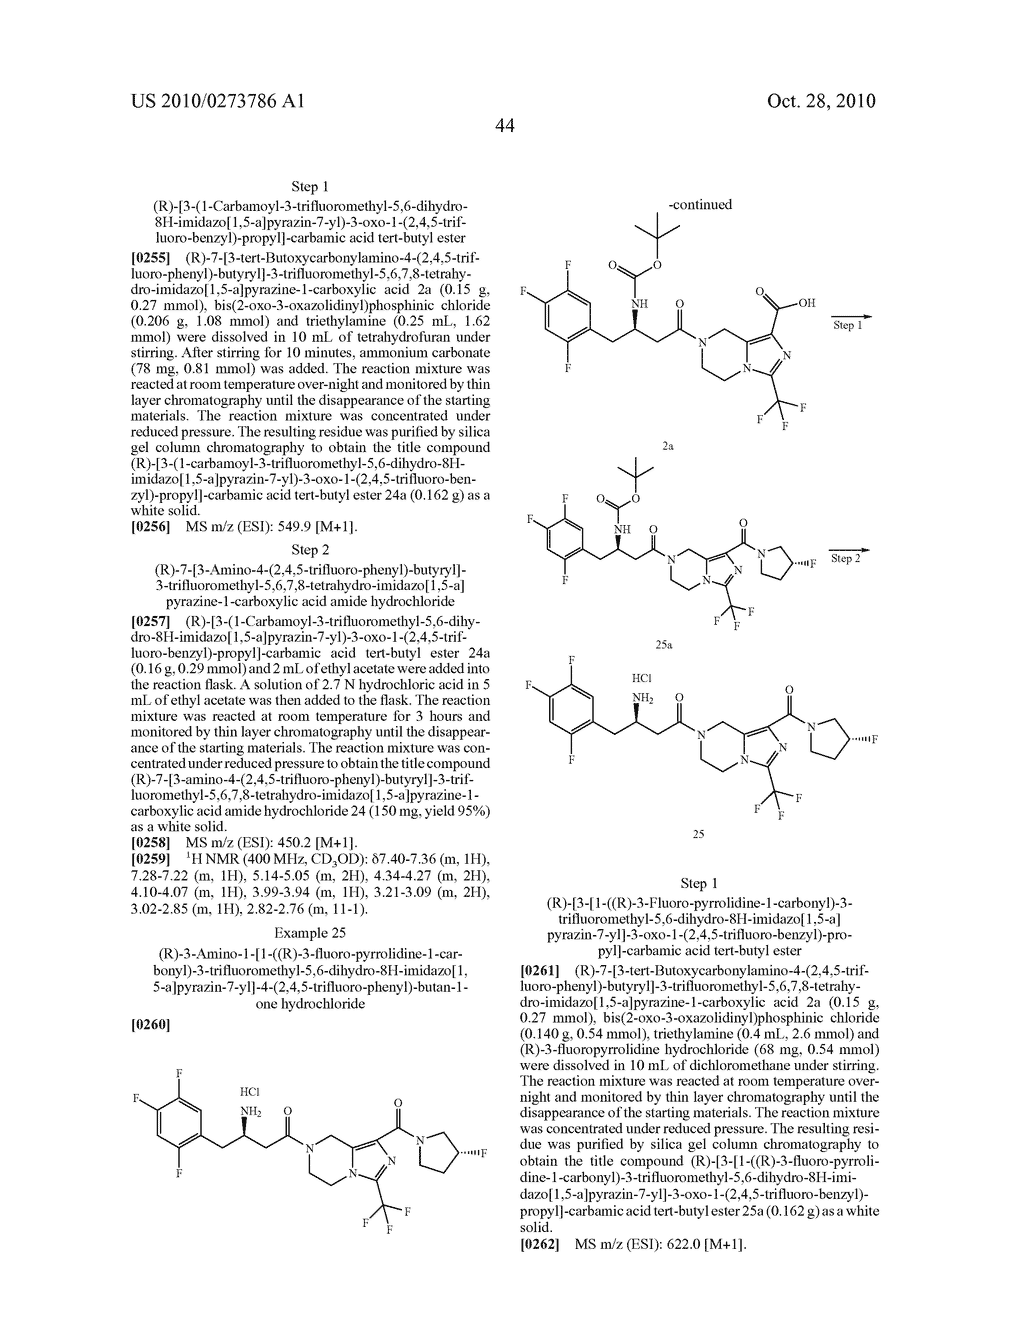 TETRAHYDRO-IMIDAZ0[1,5-A]PYRAZINE DERIVATIVES, PREPARATION PROCESS AND MEDICINAL USE THEREOF - diagram, schematic, and image 45